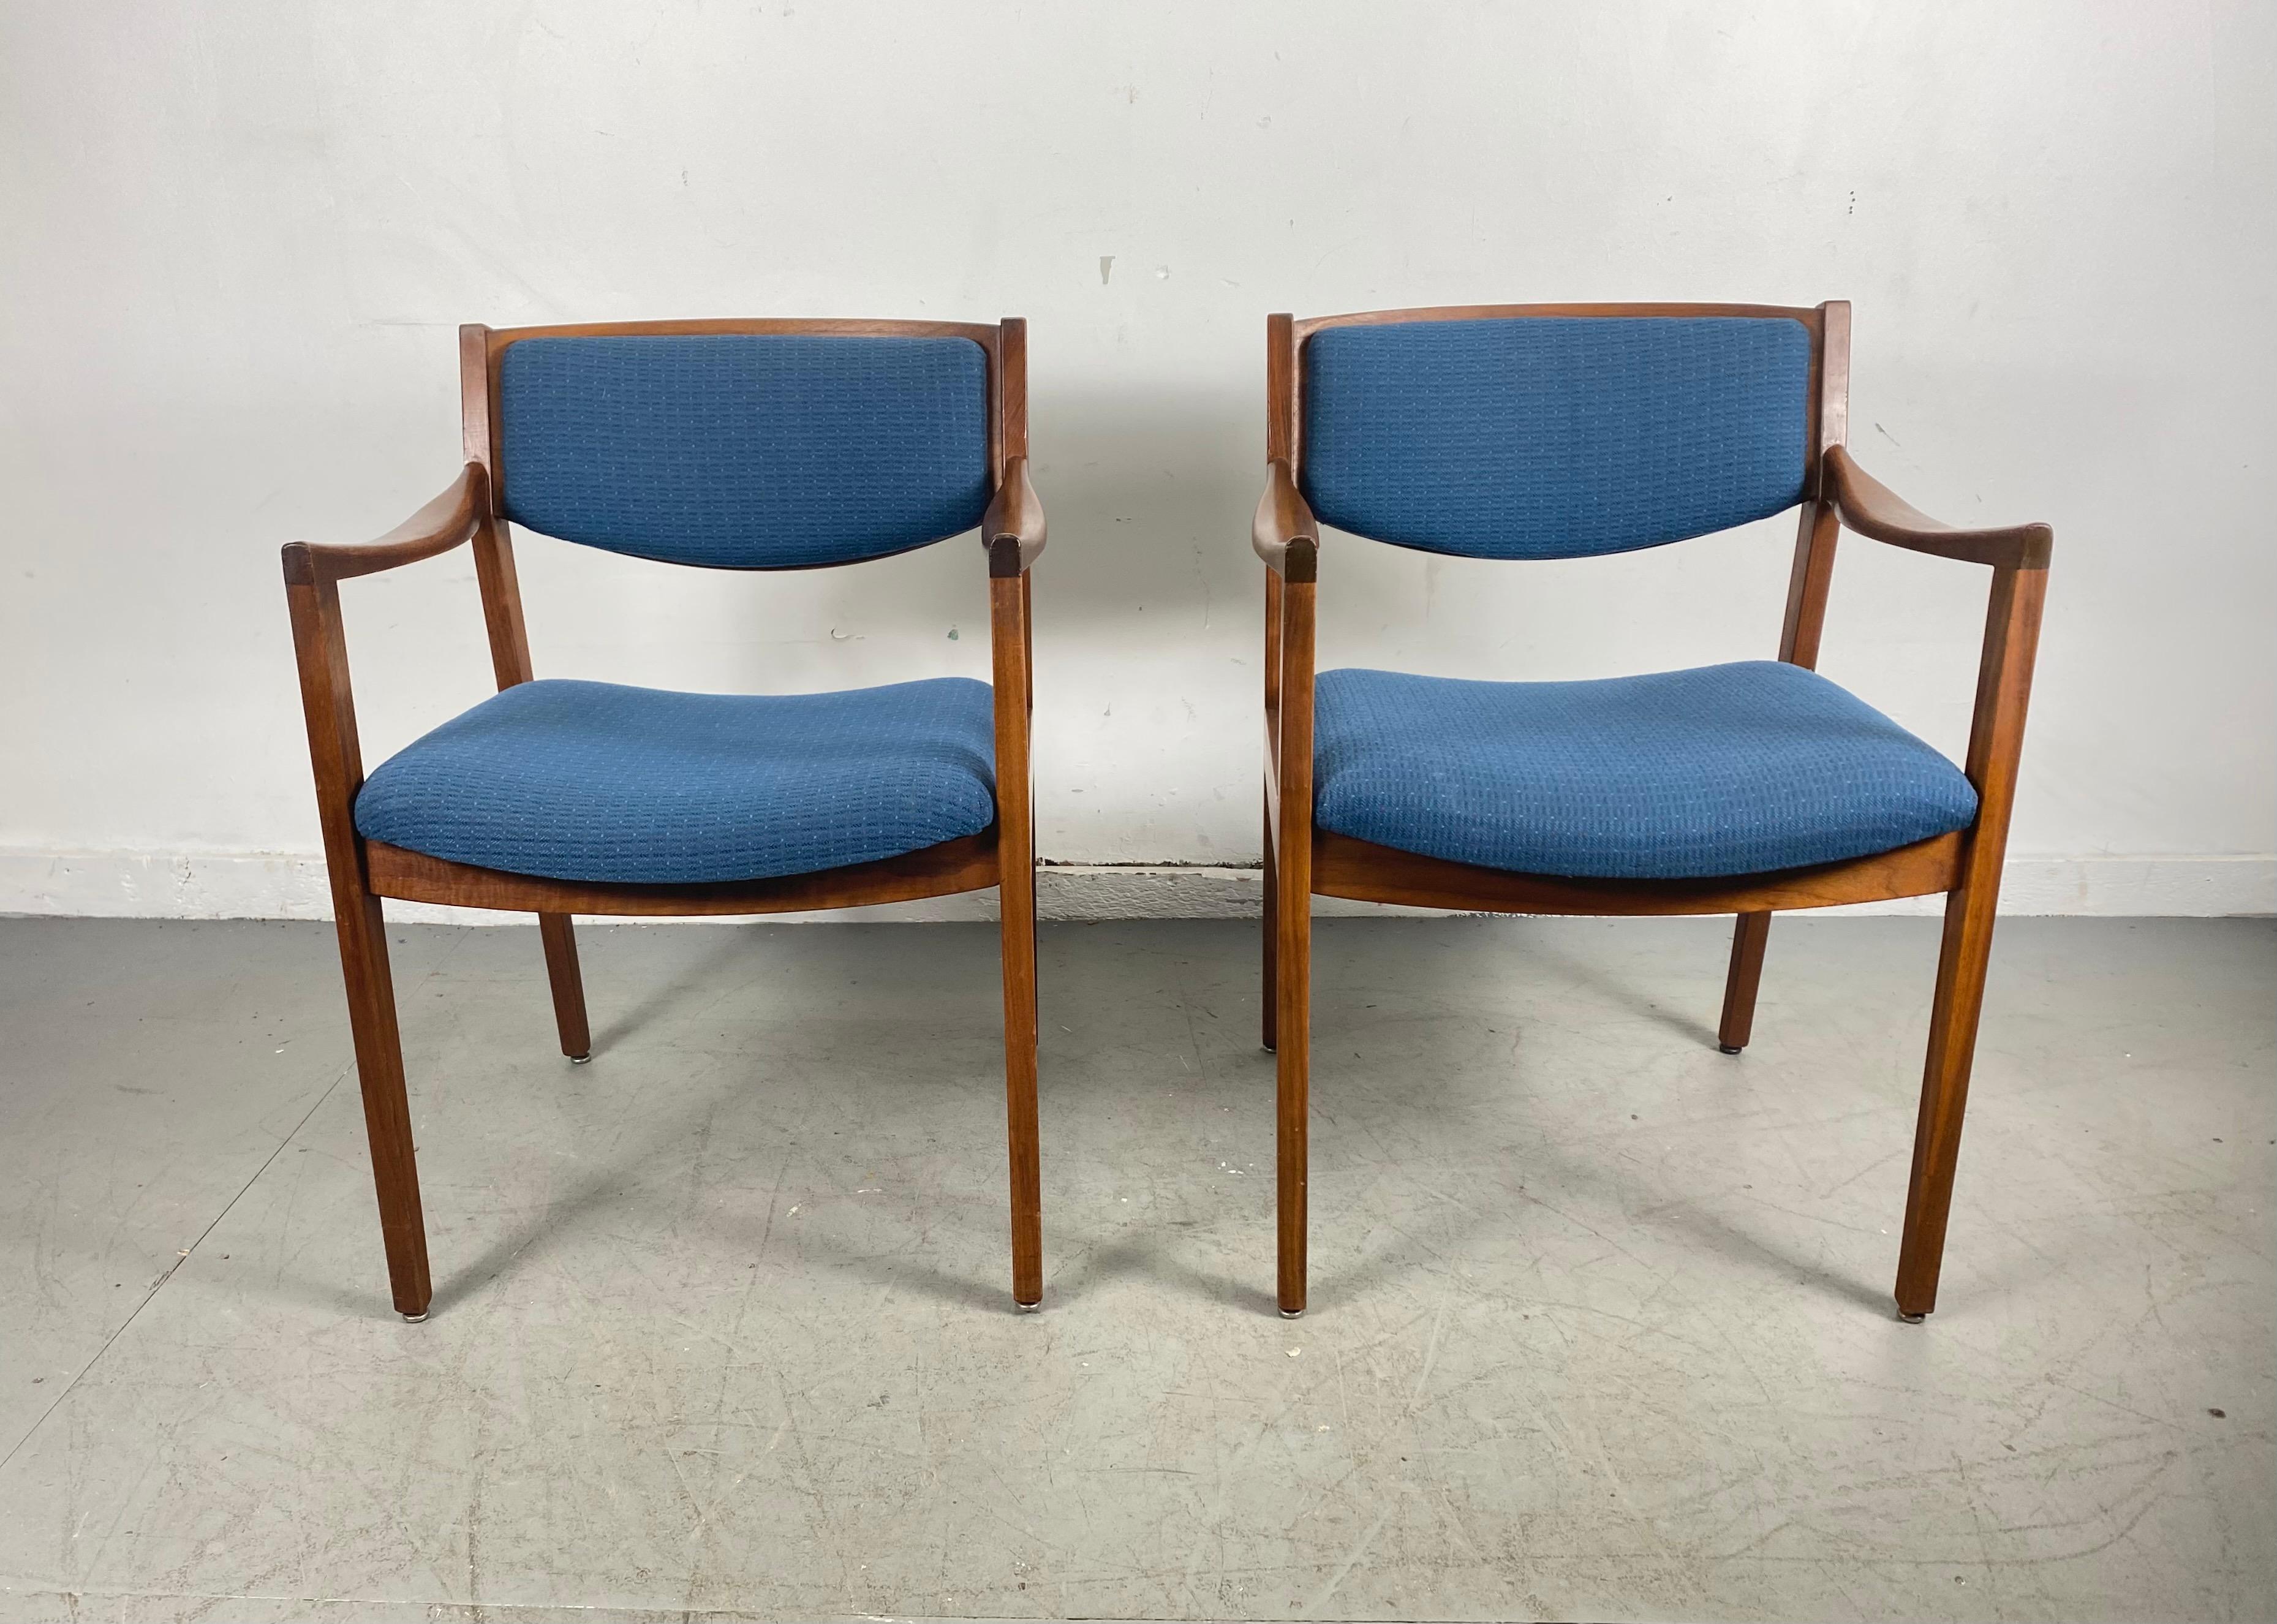 Mid-20th Century Gunlocke Modernist Walnut and Fabric Occasional Armchairs After Jens Risom, Pair For Sale